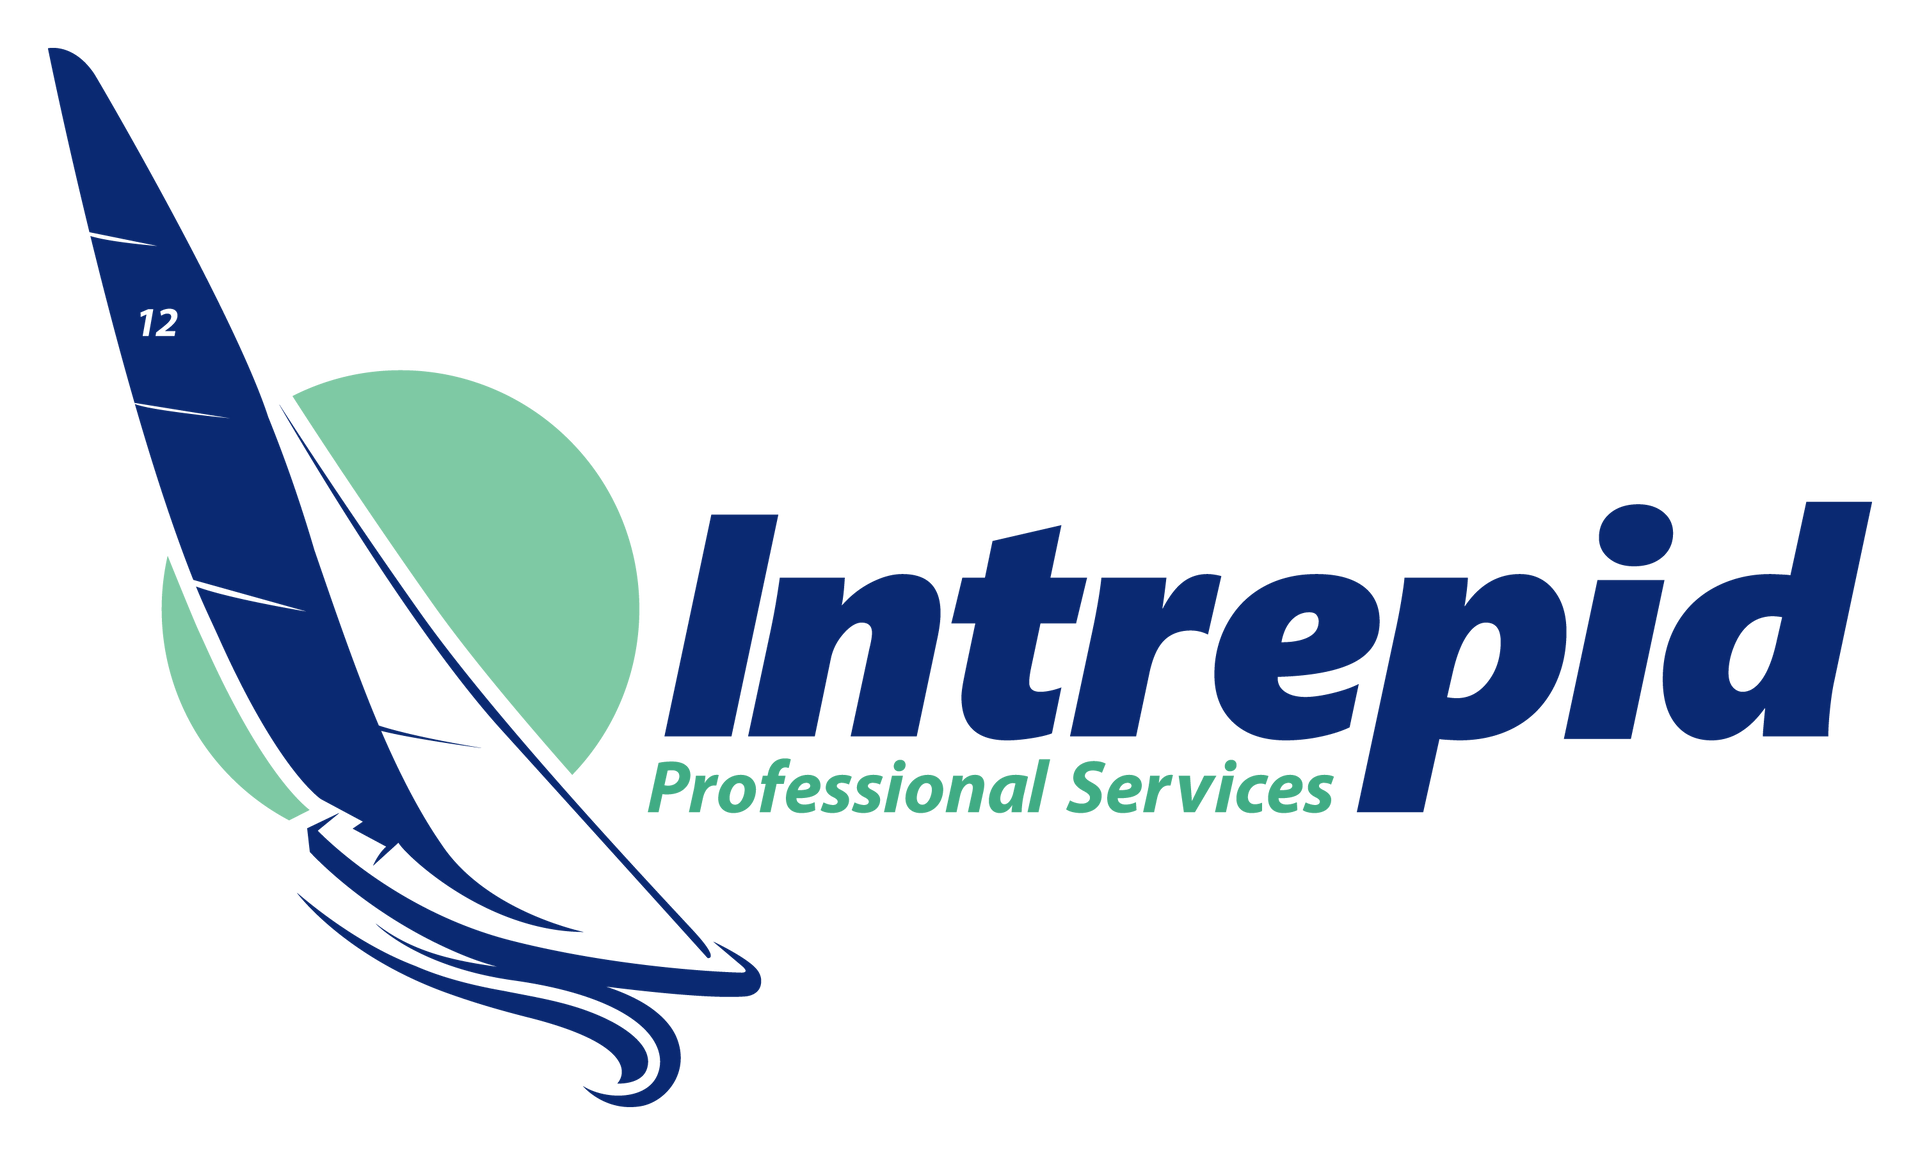 Intrepid Professional Services Logo: Your Go-to for Career Change & Transition Services.